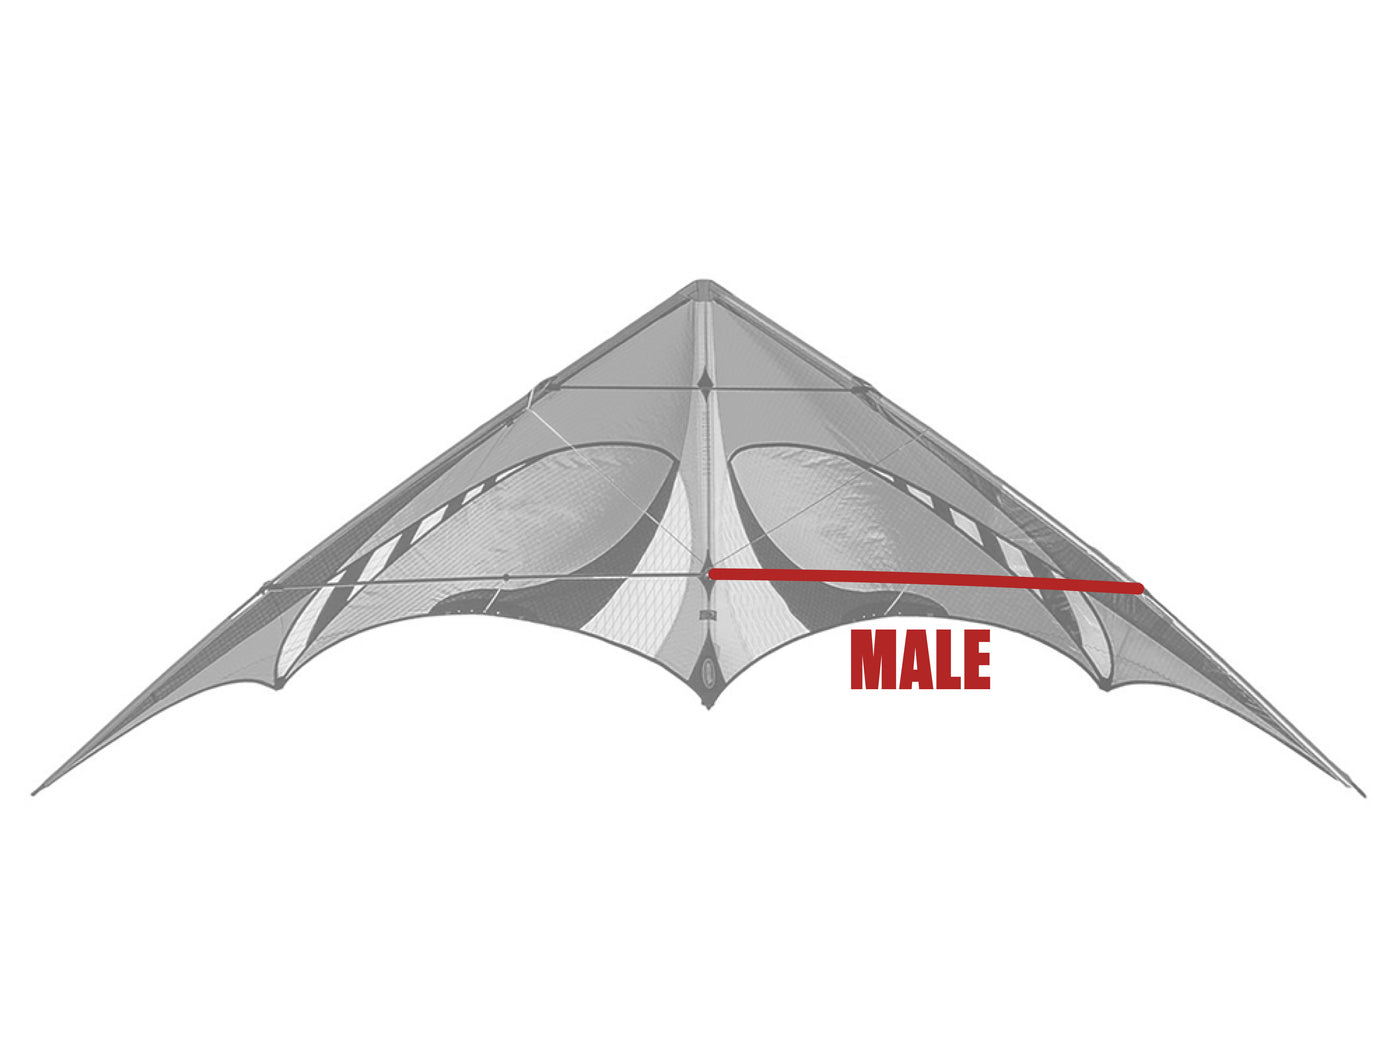 Diagram showing location of the E3 Lower Spreader Male on the kite.